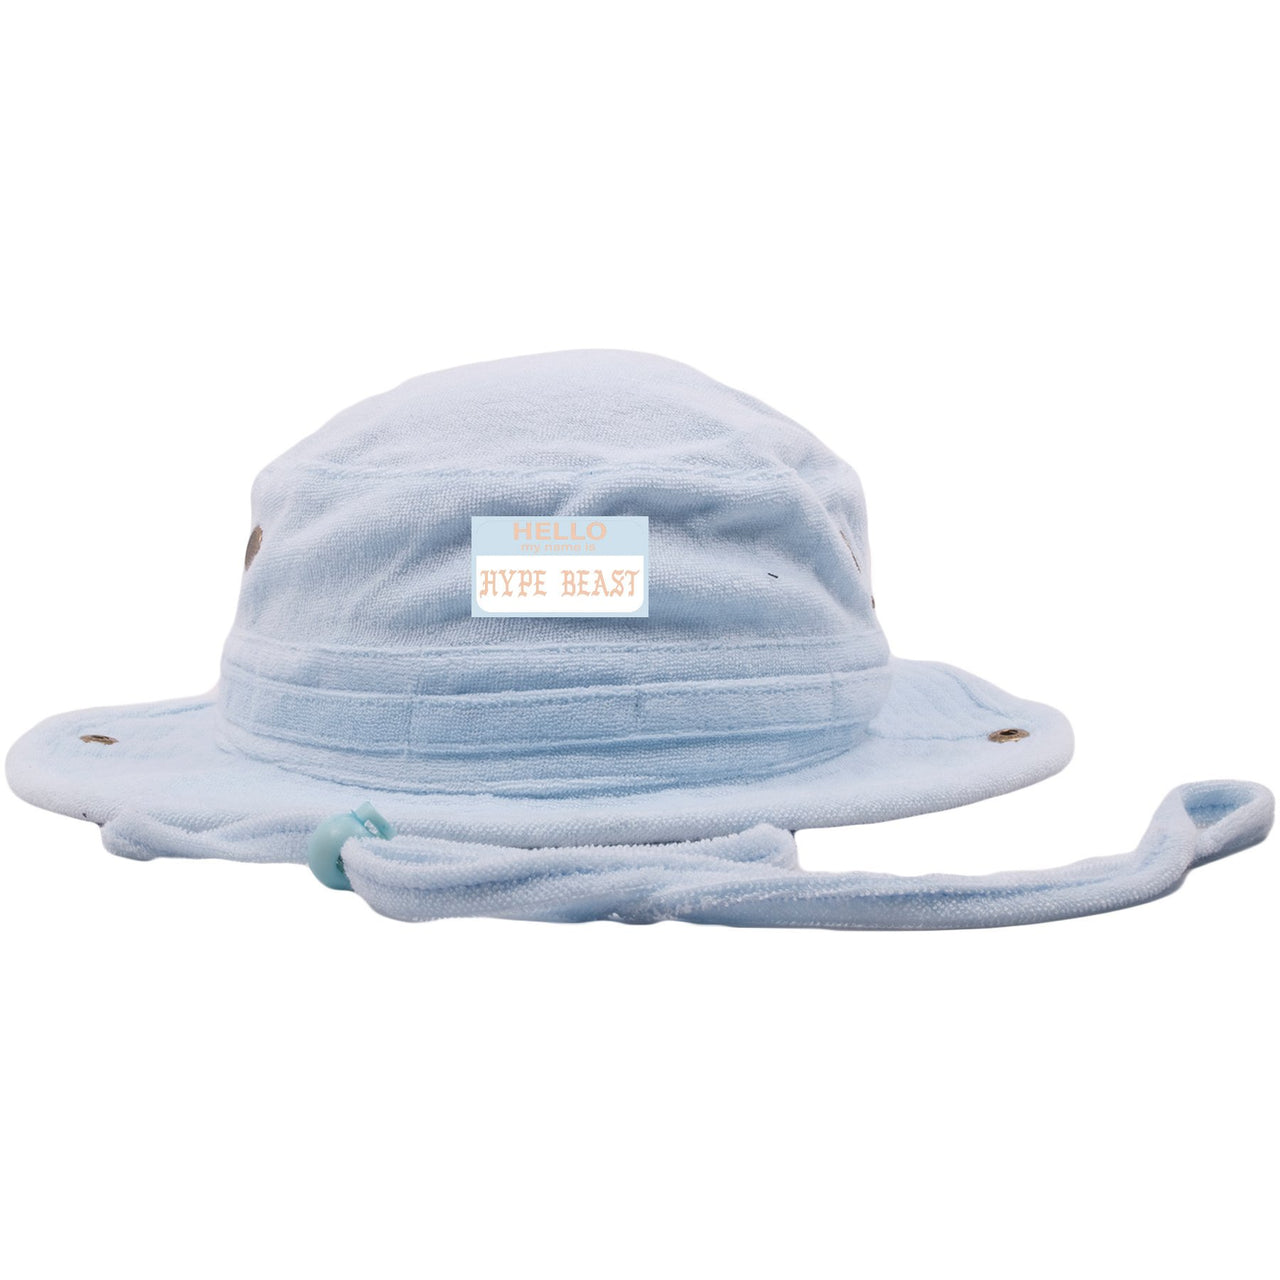 Hyperspace 350s Bucket Hat | Hello My Name Is Hype Beast Pablo, Light Blue